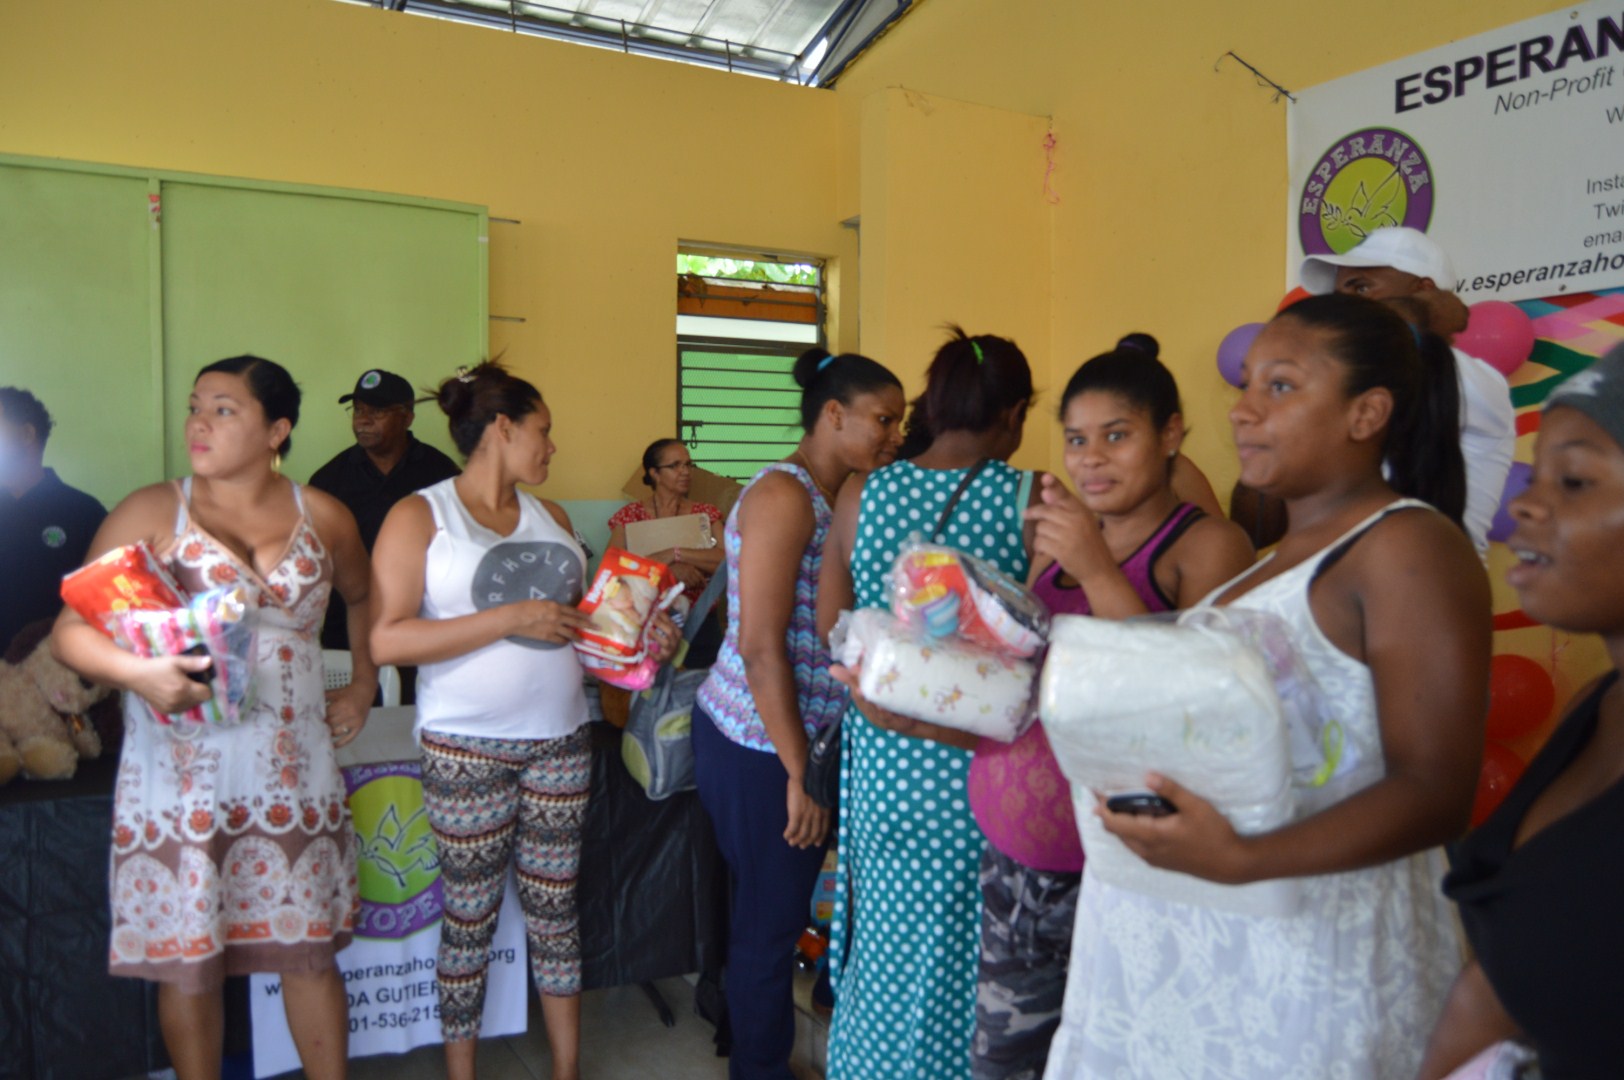 Mothers receiving packs of diapers and clothes, another angle